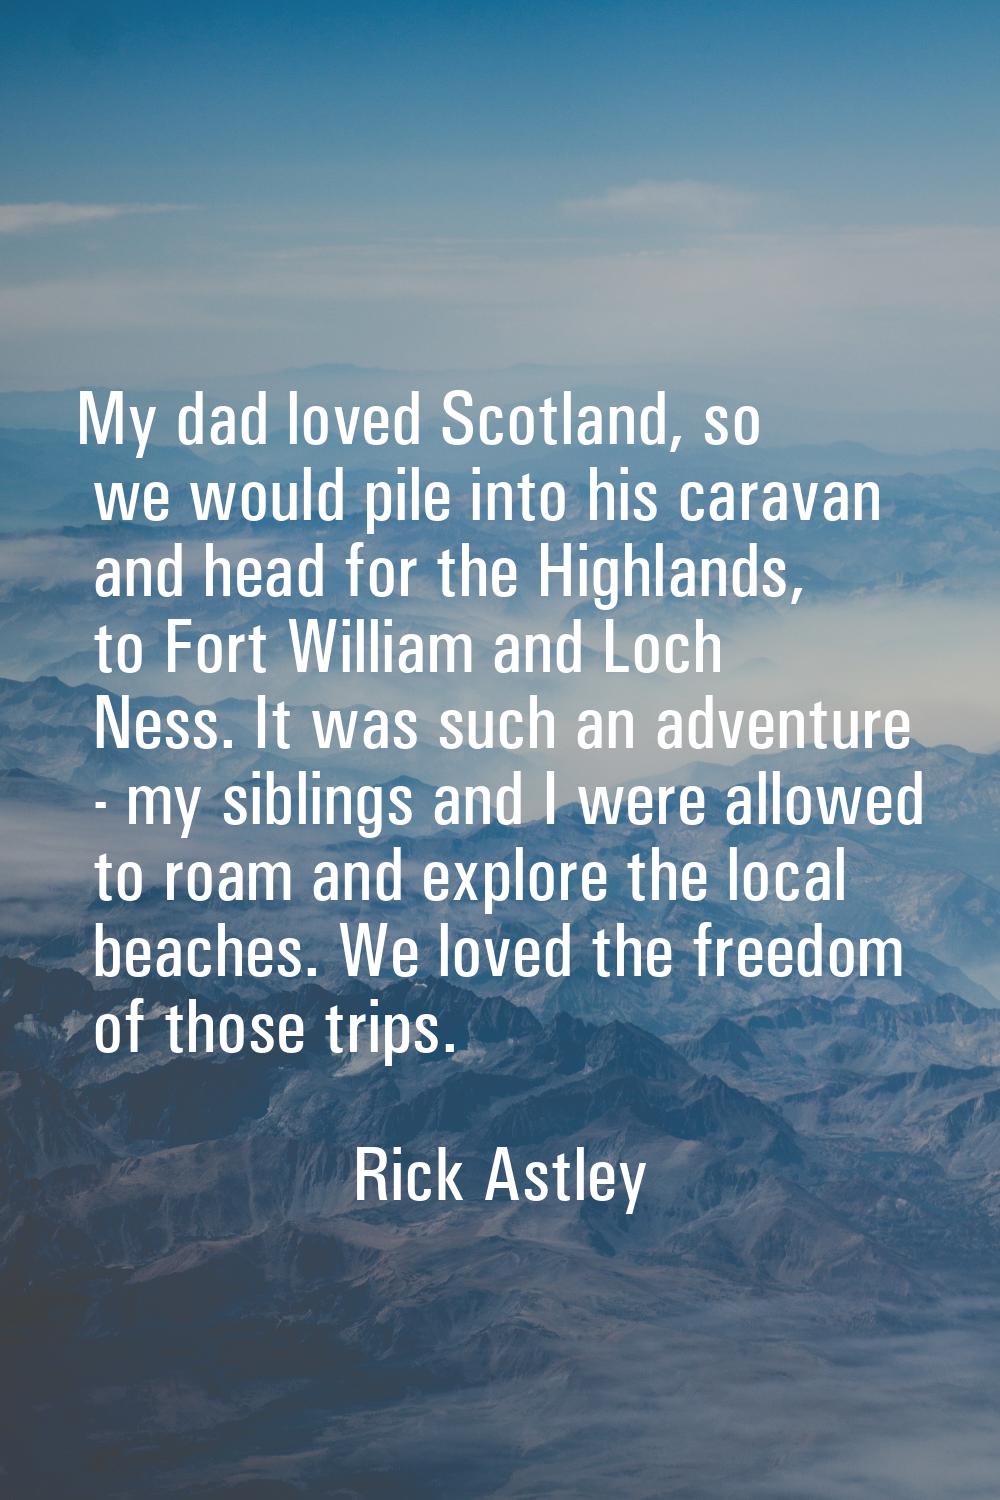 My dad loved Scotland, so we would pile into his caravan and head for the Highlands, to Fort Willia